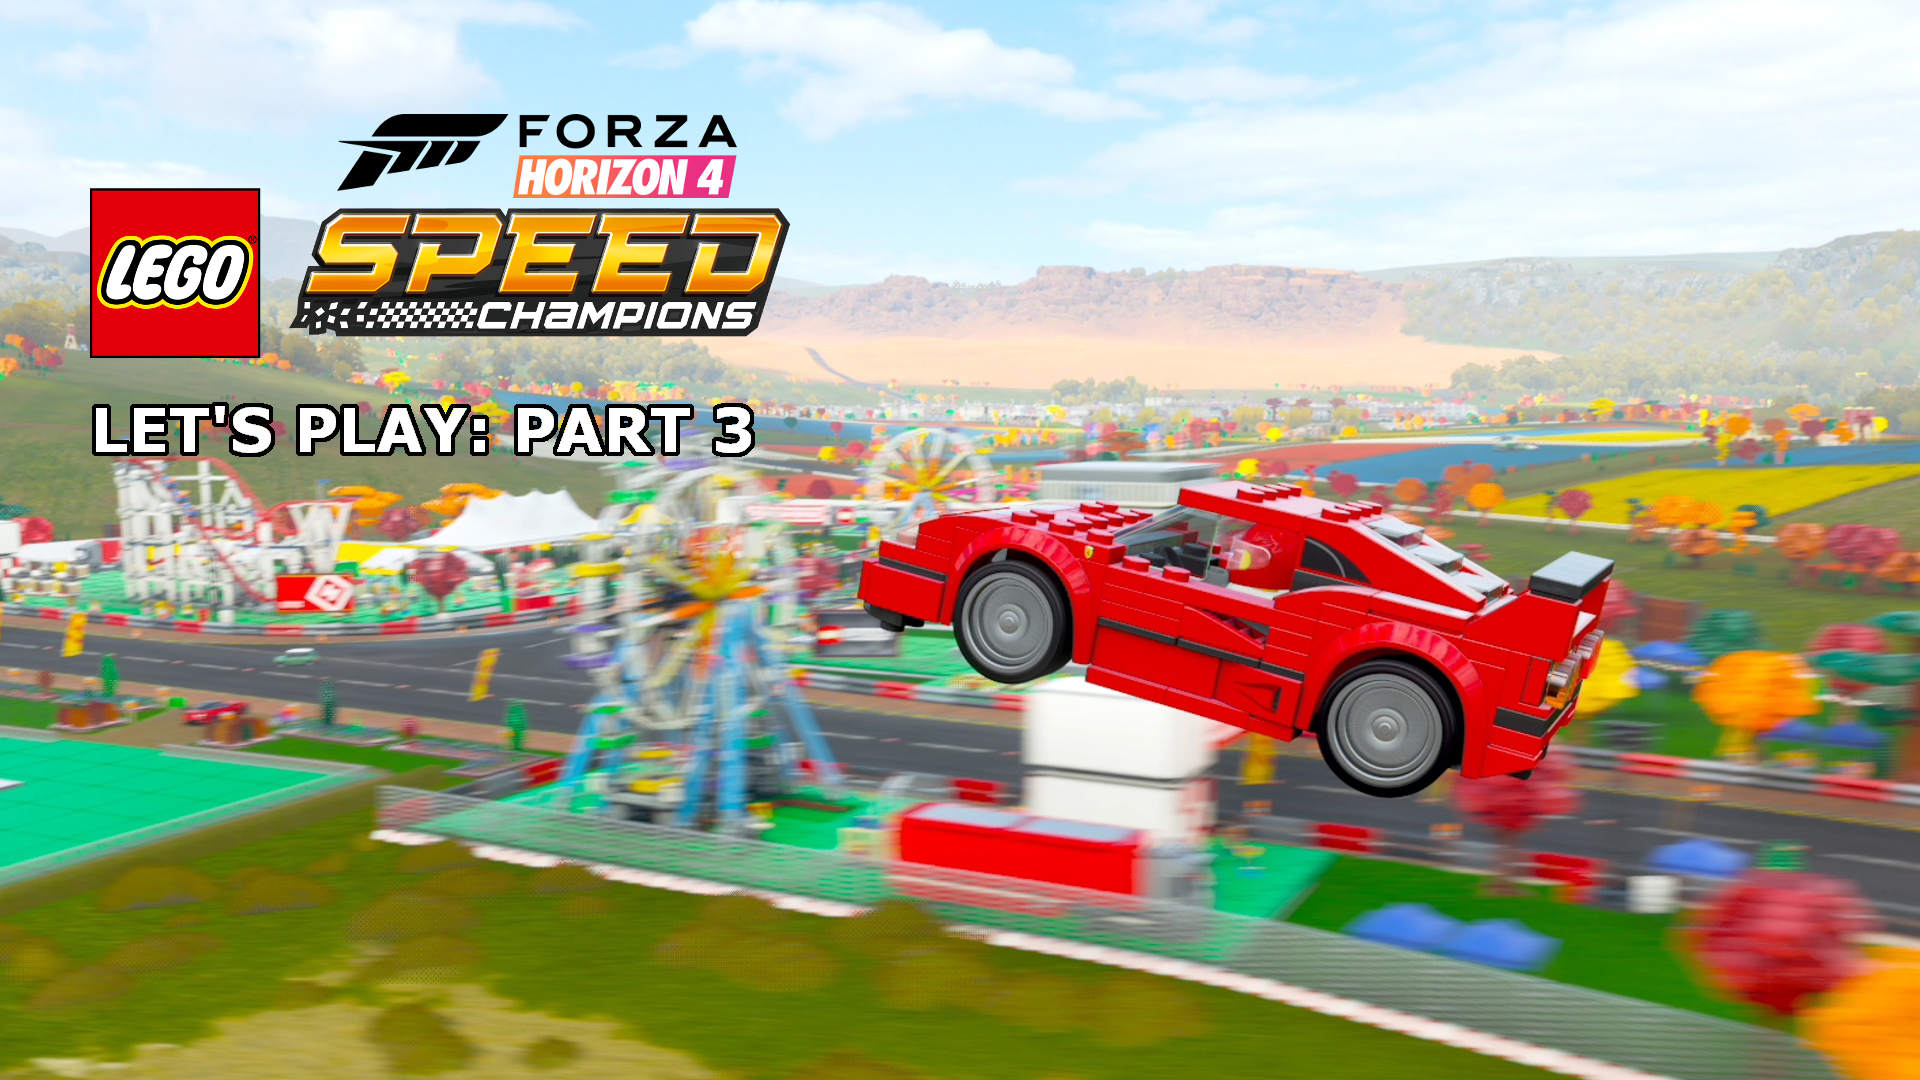 download forza horizon 4 lego speed champions for free